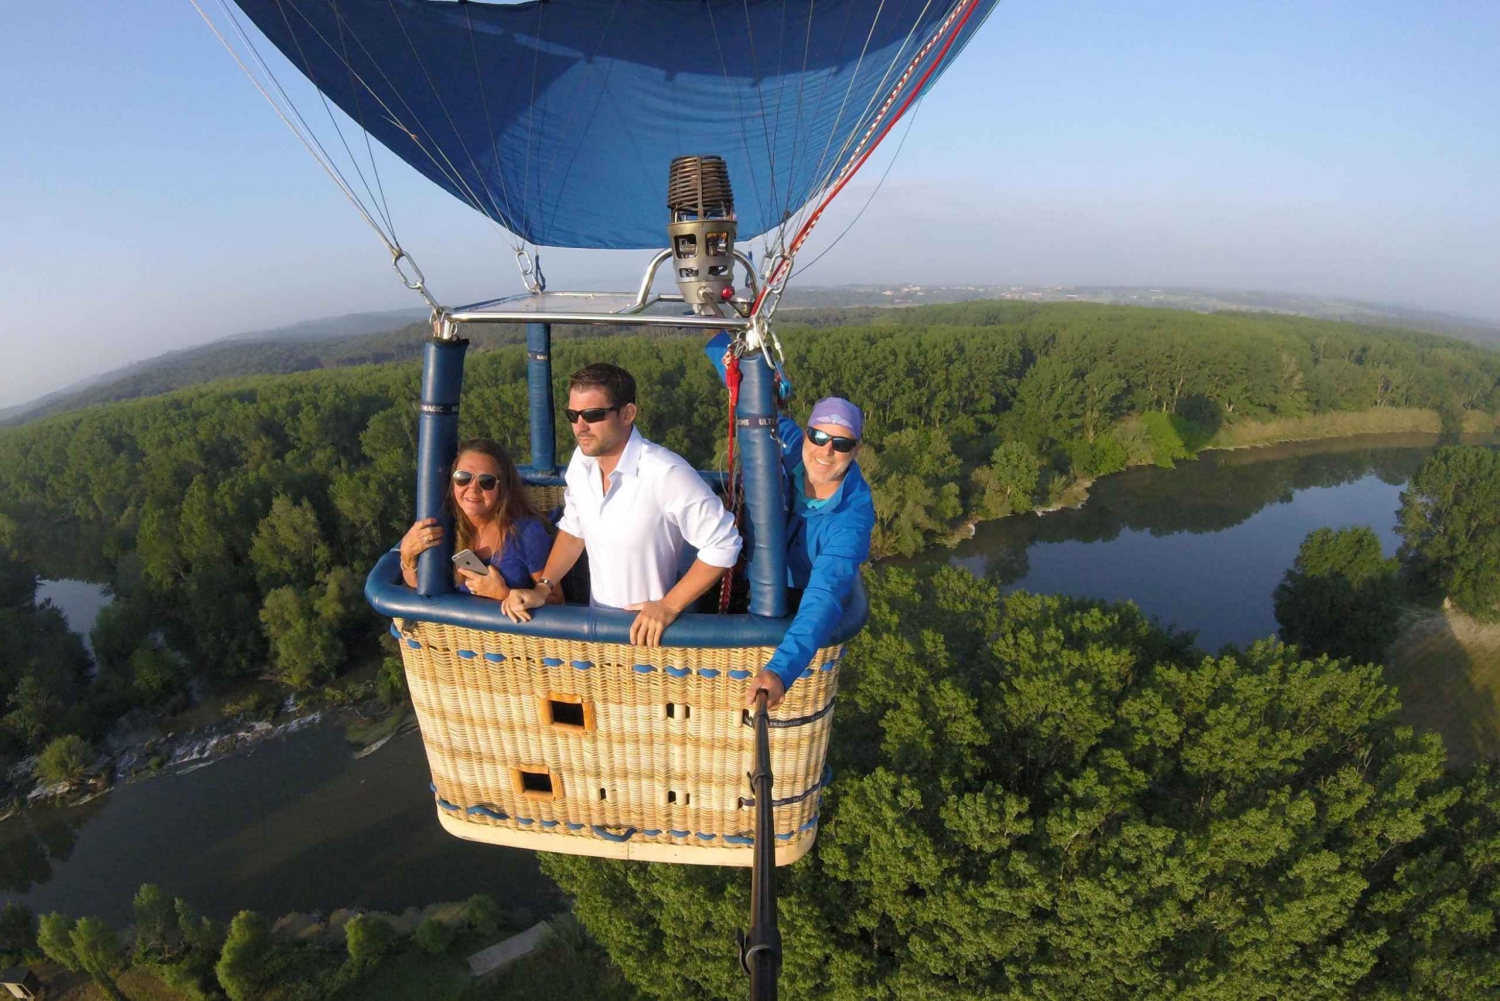 Private Balloon Flight for Two or 4 Pax from Barcelona